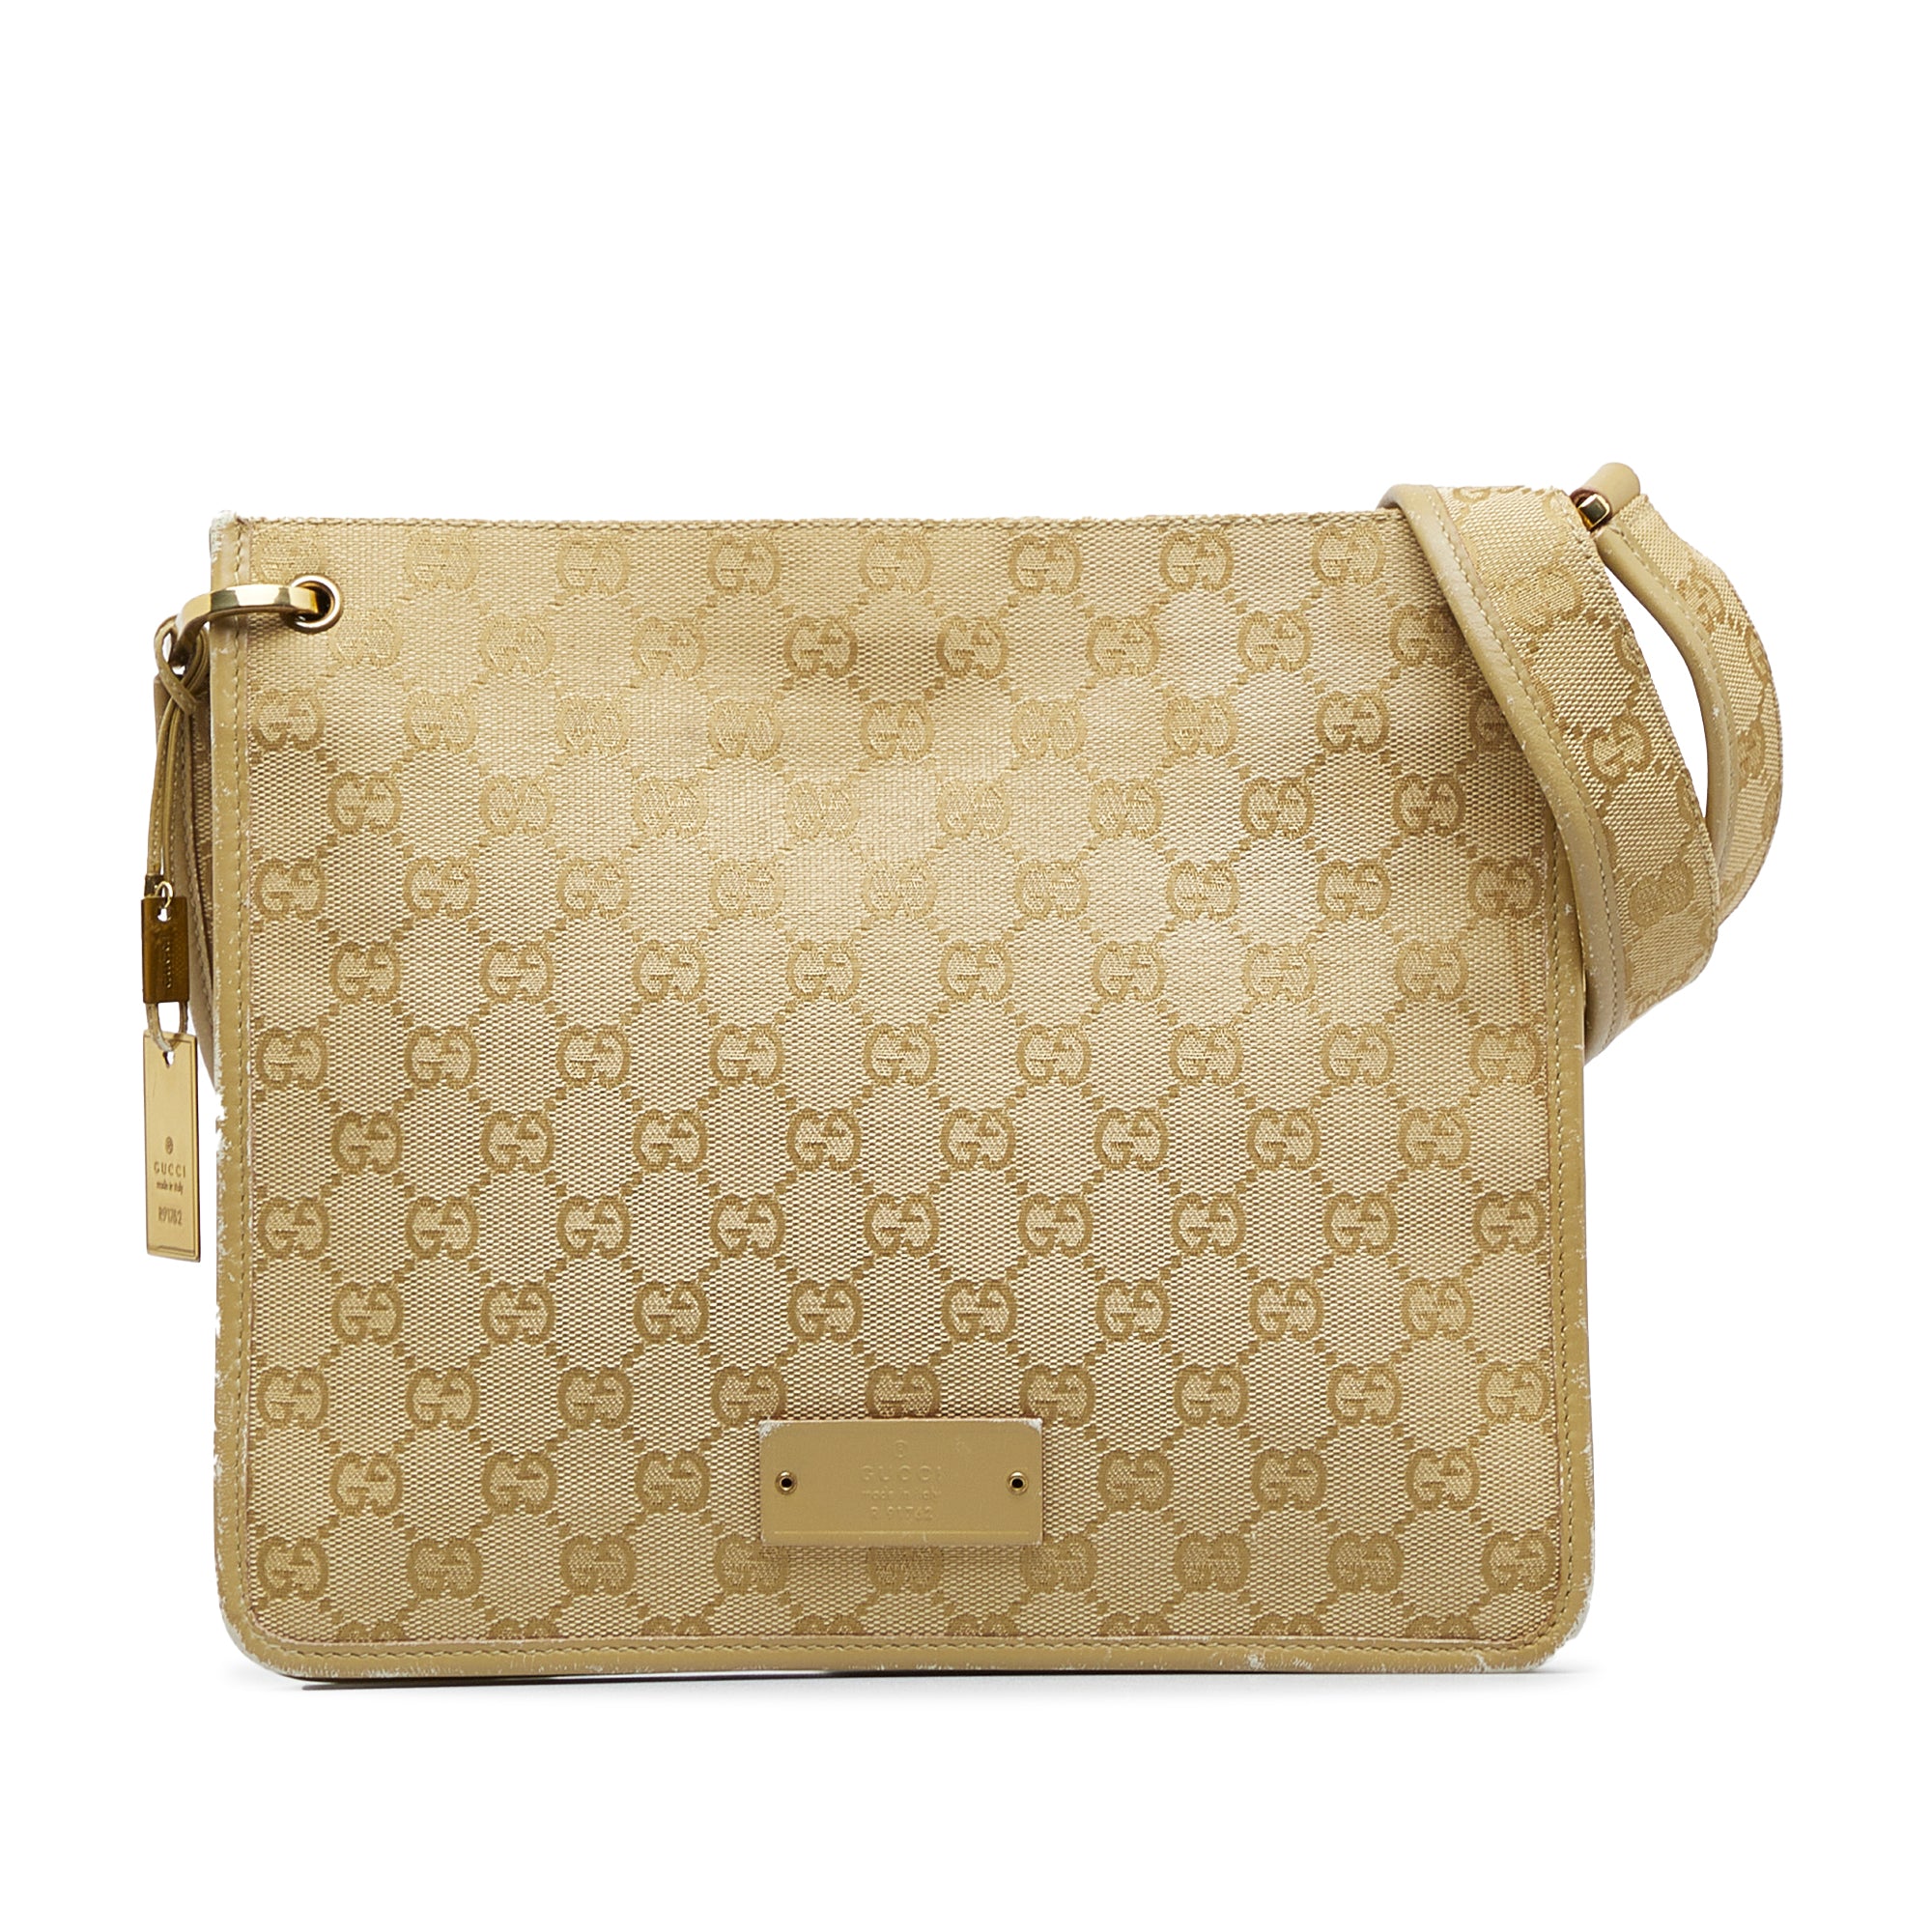 Gucci - Authenticated Travel Bag - Leather Beige for Women, Very Good Condition